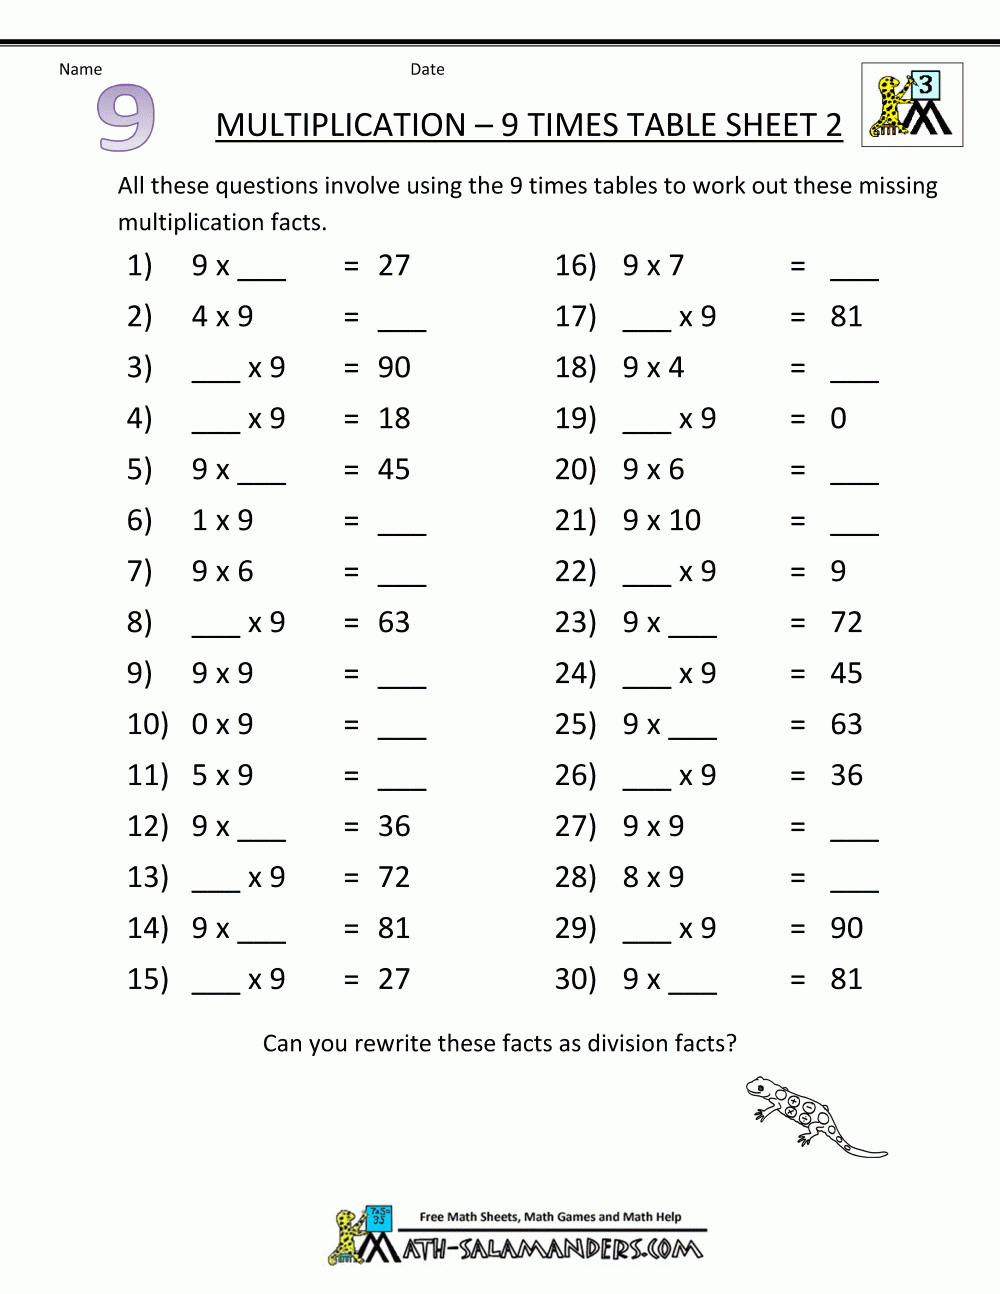 Multiplication Drill Sheets 3Rd Grade - Grade 9 Math Worksheets Printable Free With Answers